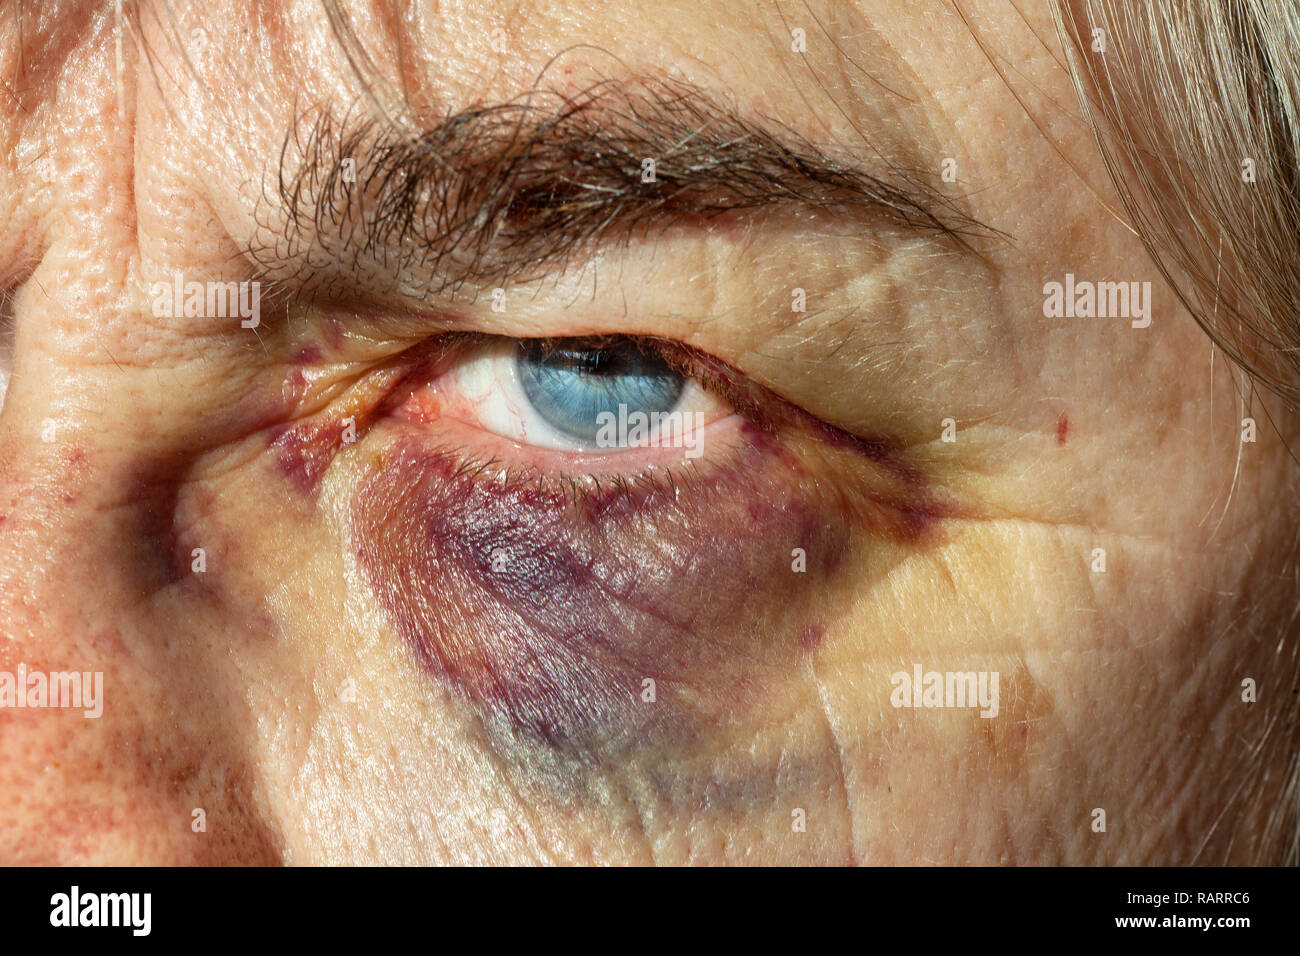 Closeup of a woman with a black eye. Stock Photo